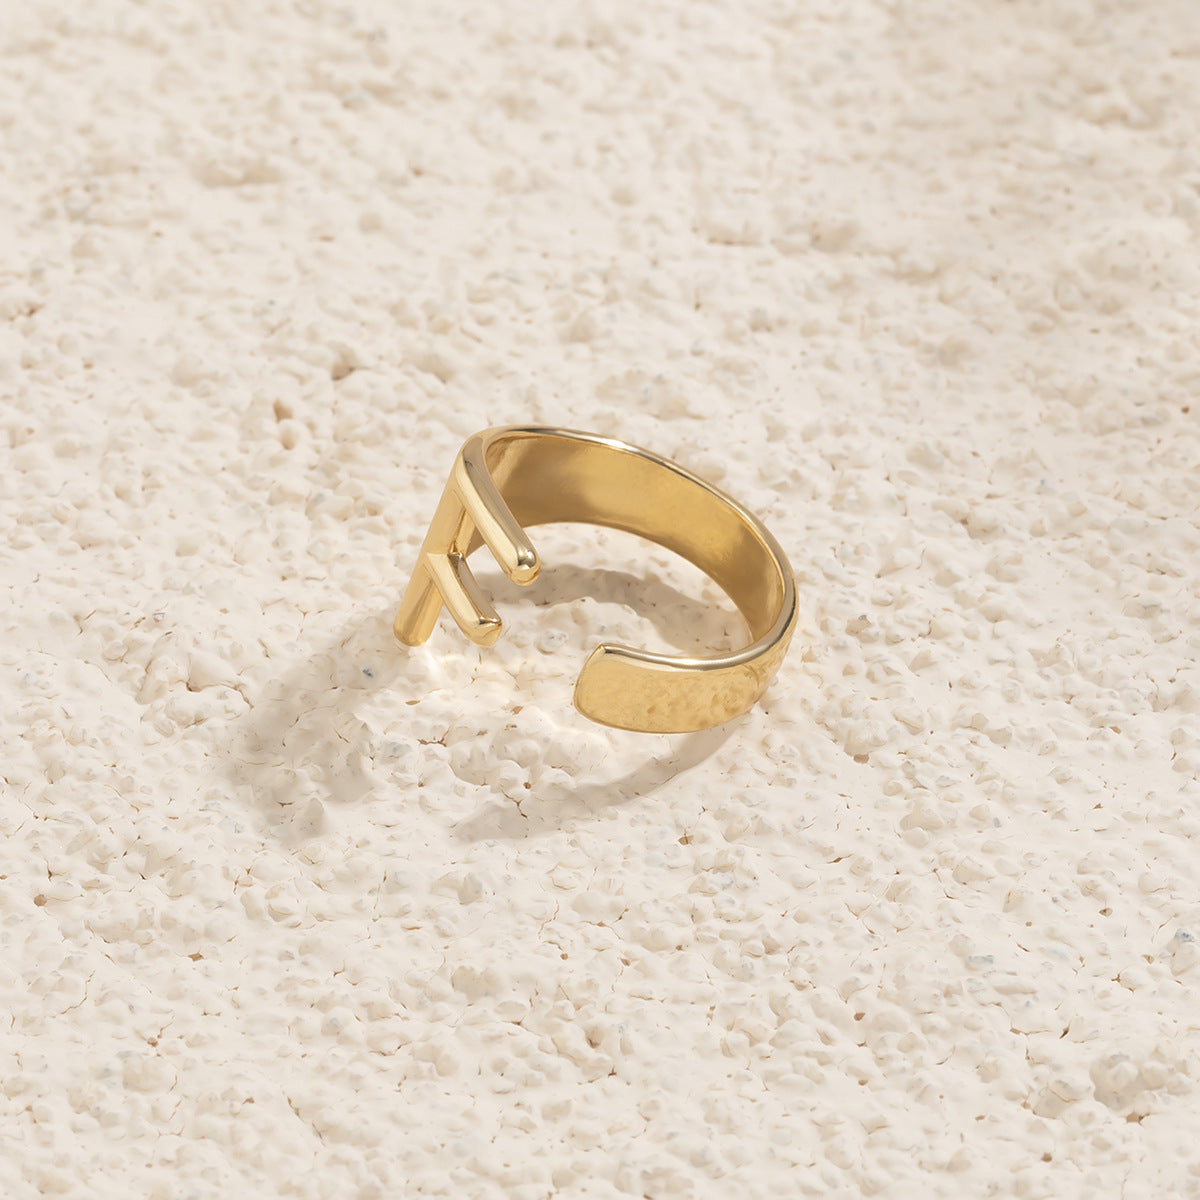 Geometric Hollow Gold Ring with Cross-border Styling